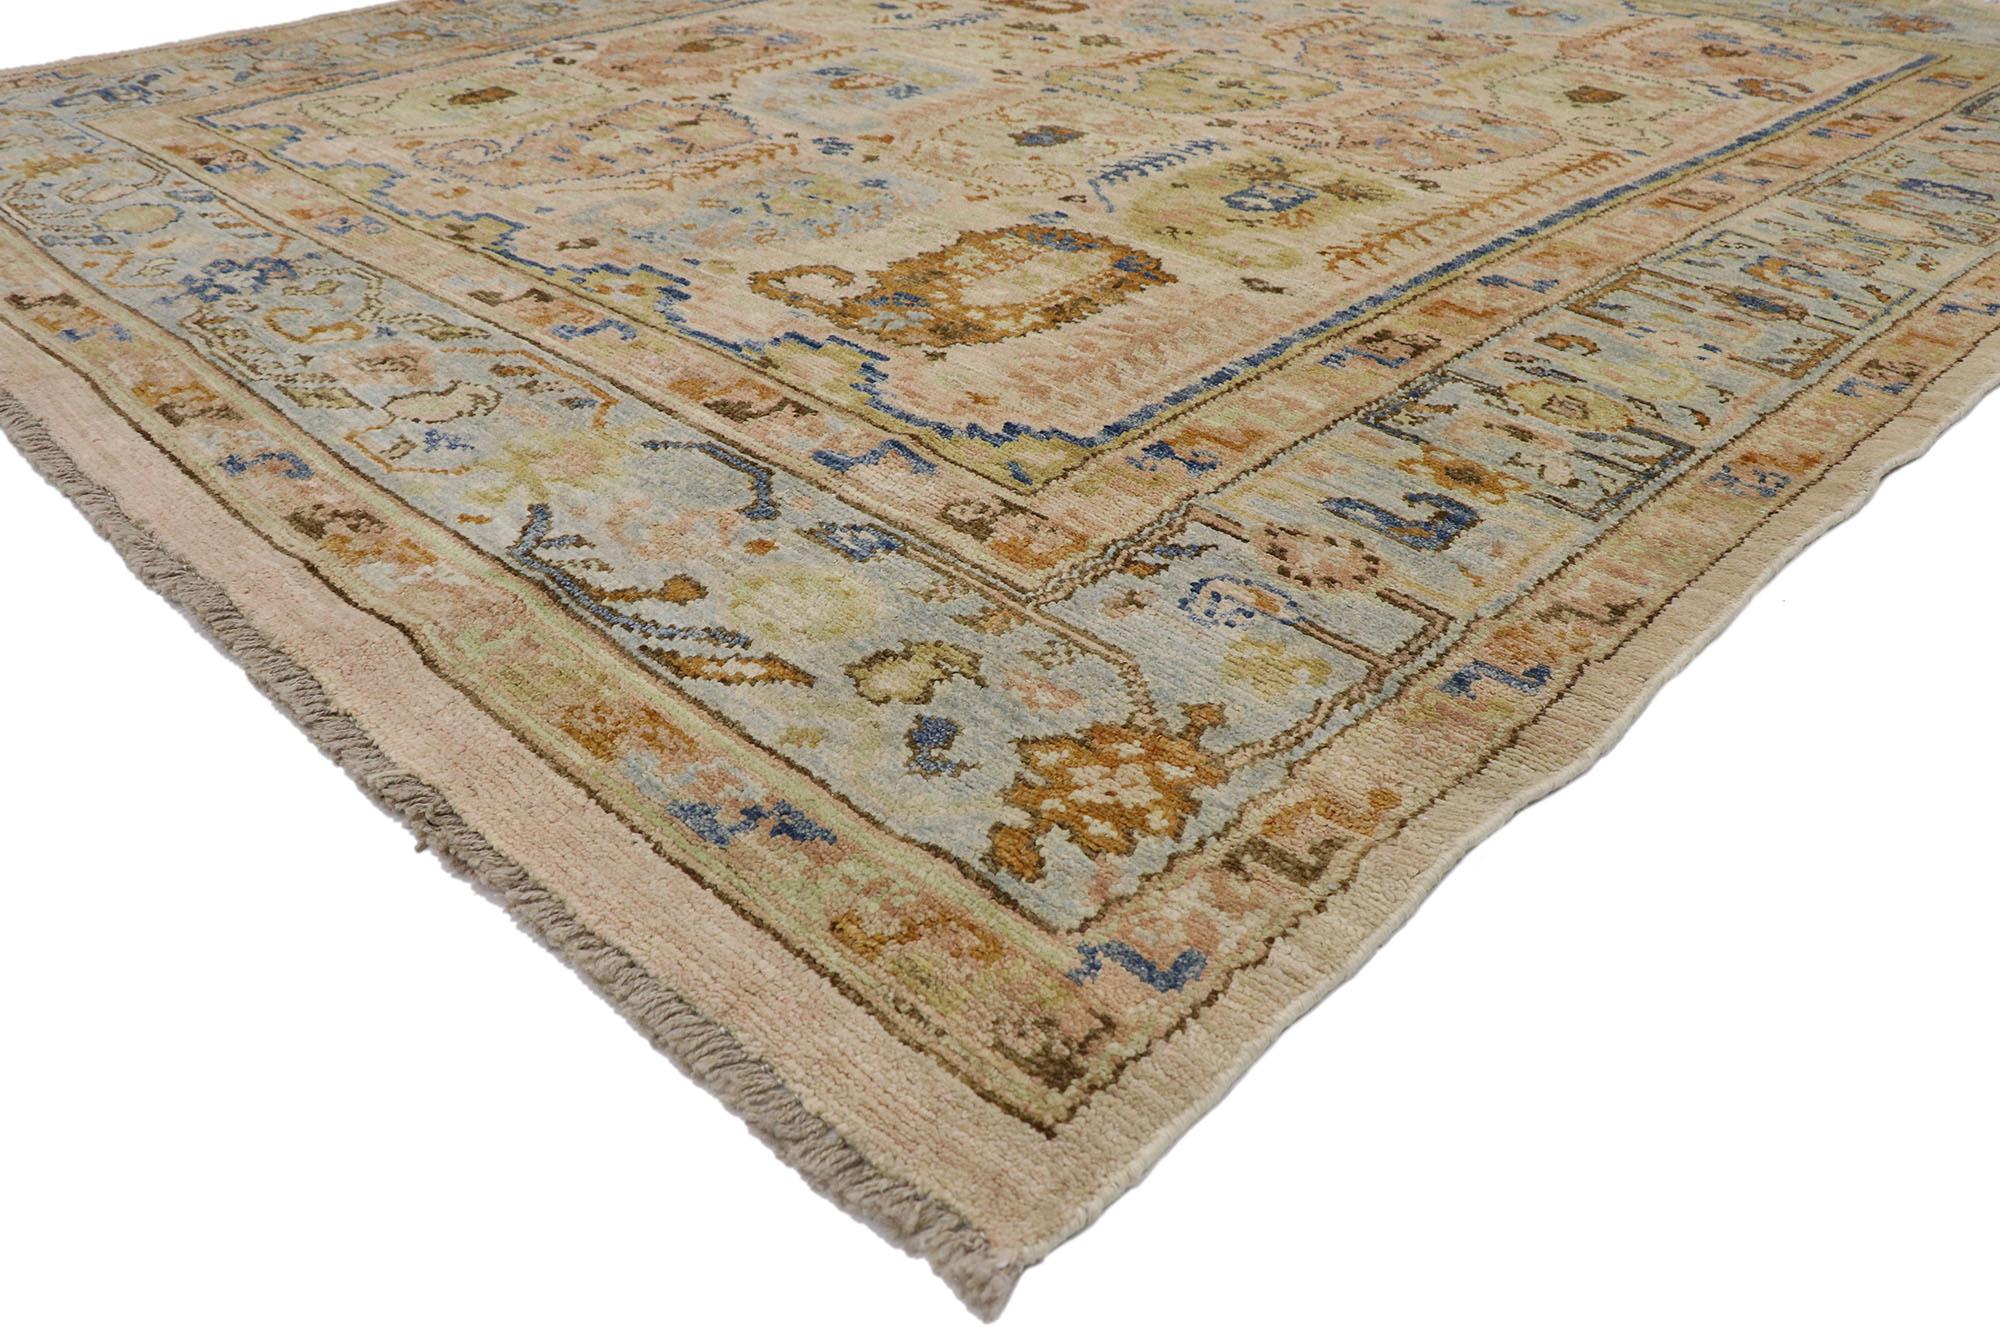 80678 new Contemporary oushak Boteh rug with Modern style 08'00 x 09'08. Give the look of woven wonders and decorative elegance with this hand-knotted wool contemporary Oushak boteh rug. The abrashed tan field displays an all-over repetitive pattern